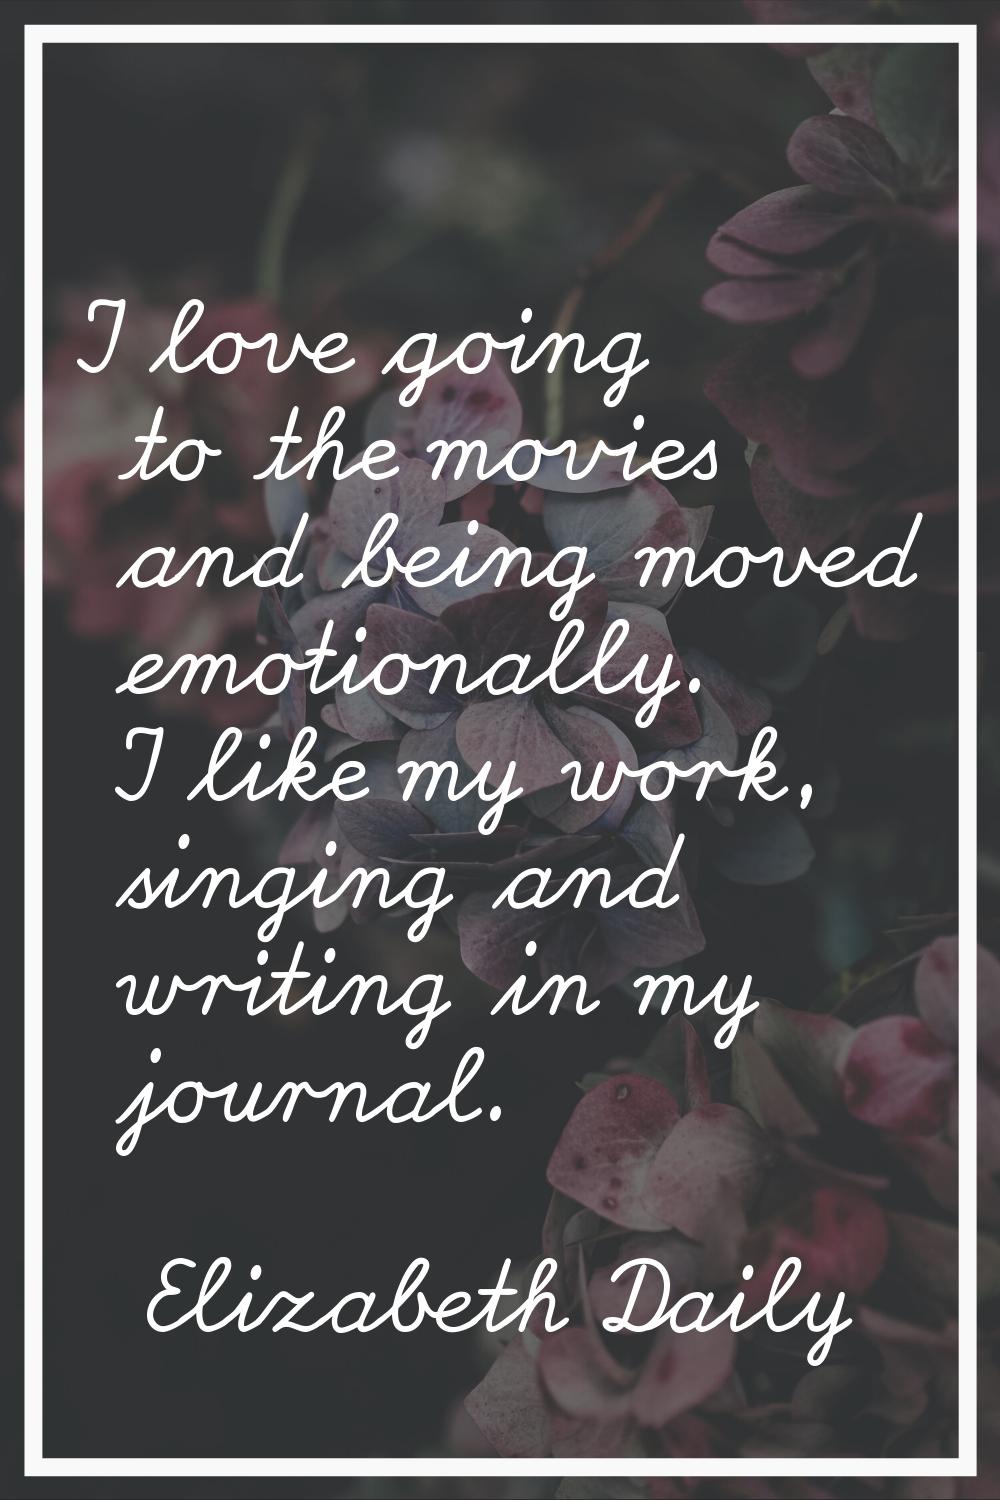 I love going to the movies and being moved emotionally. I like my work, singing and writing in my j